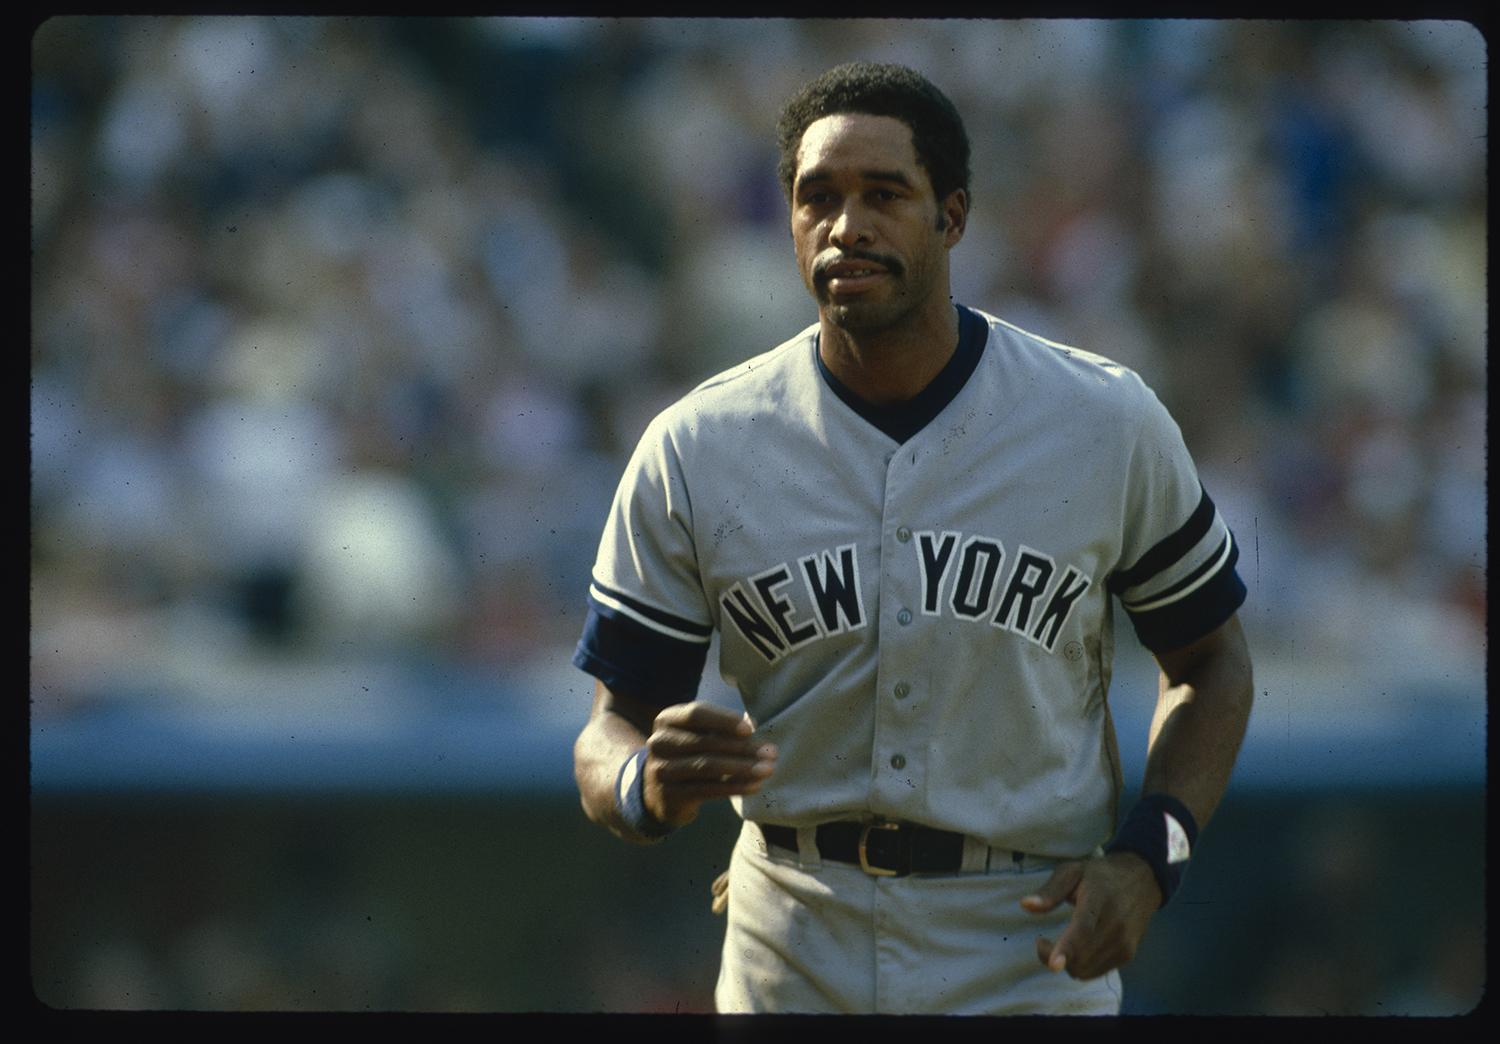 Dave Winfield could do it ALL! The Hall of Famer was AWESOME on